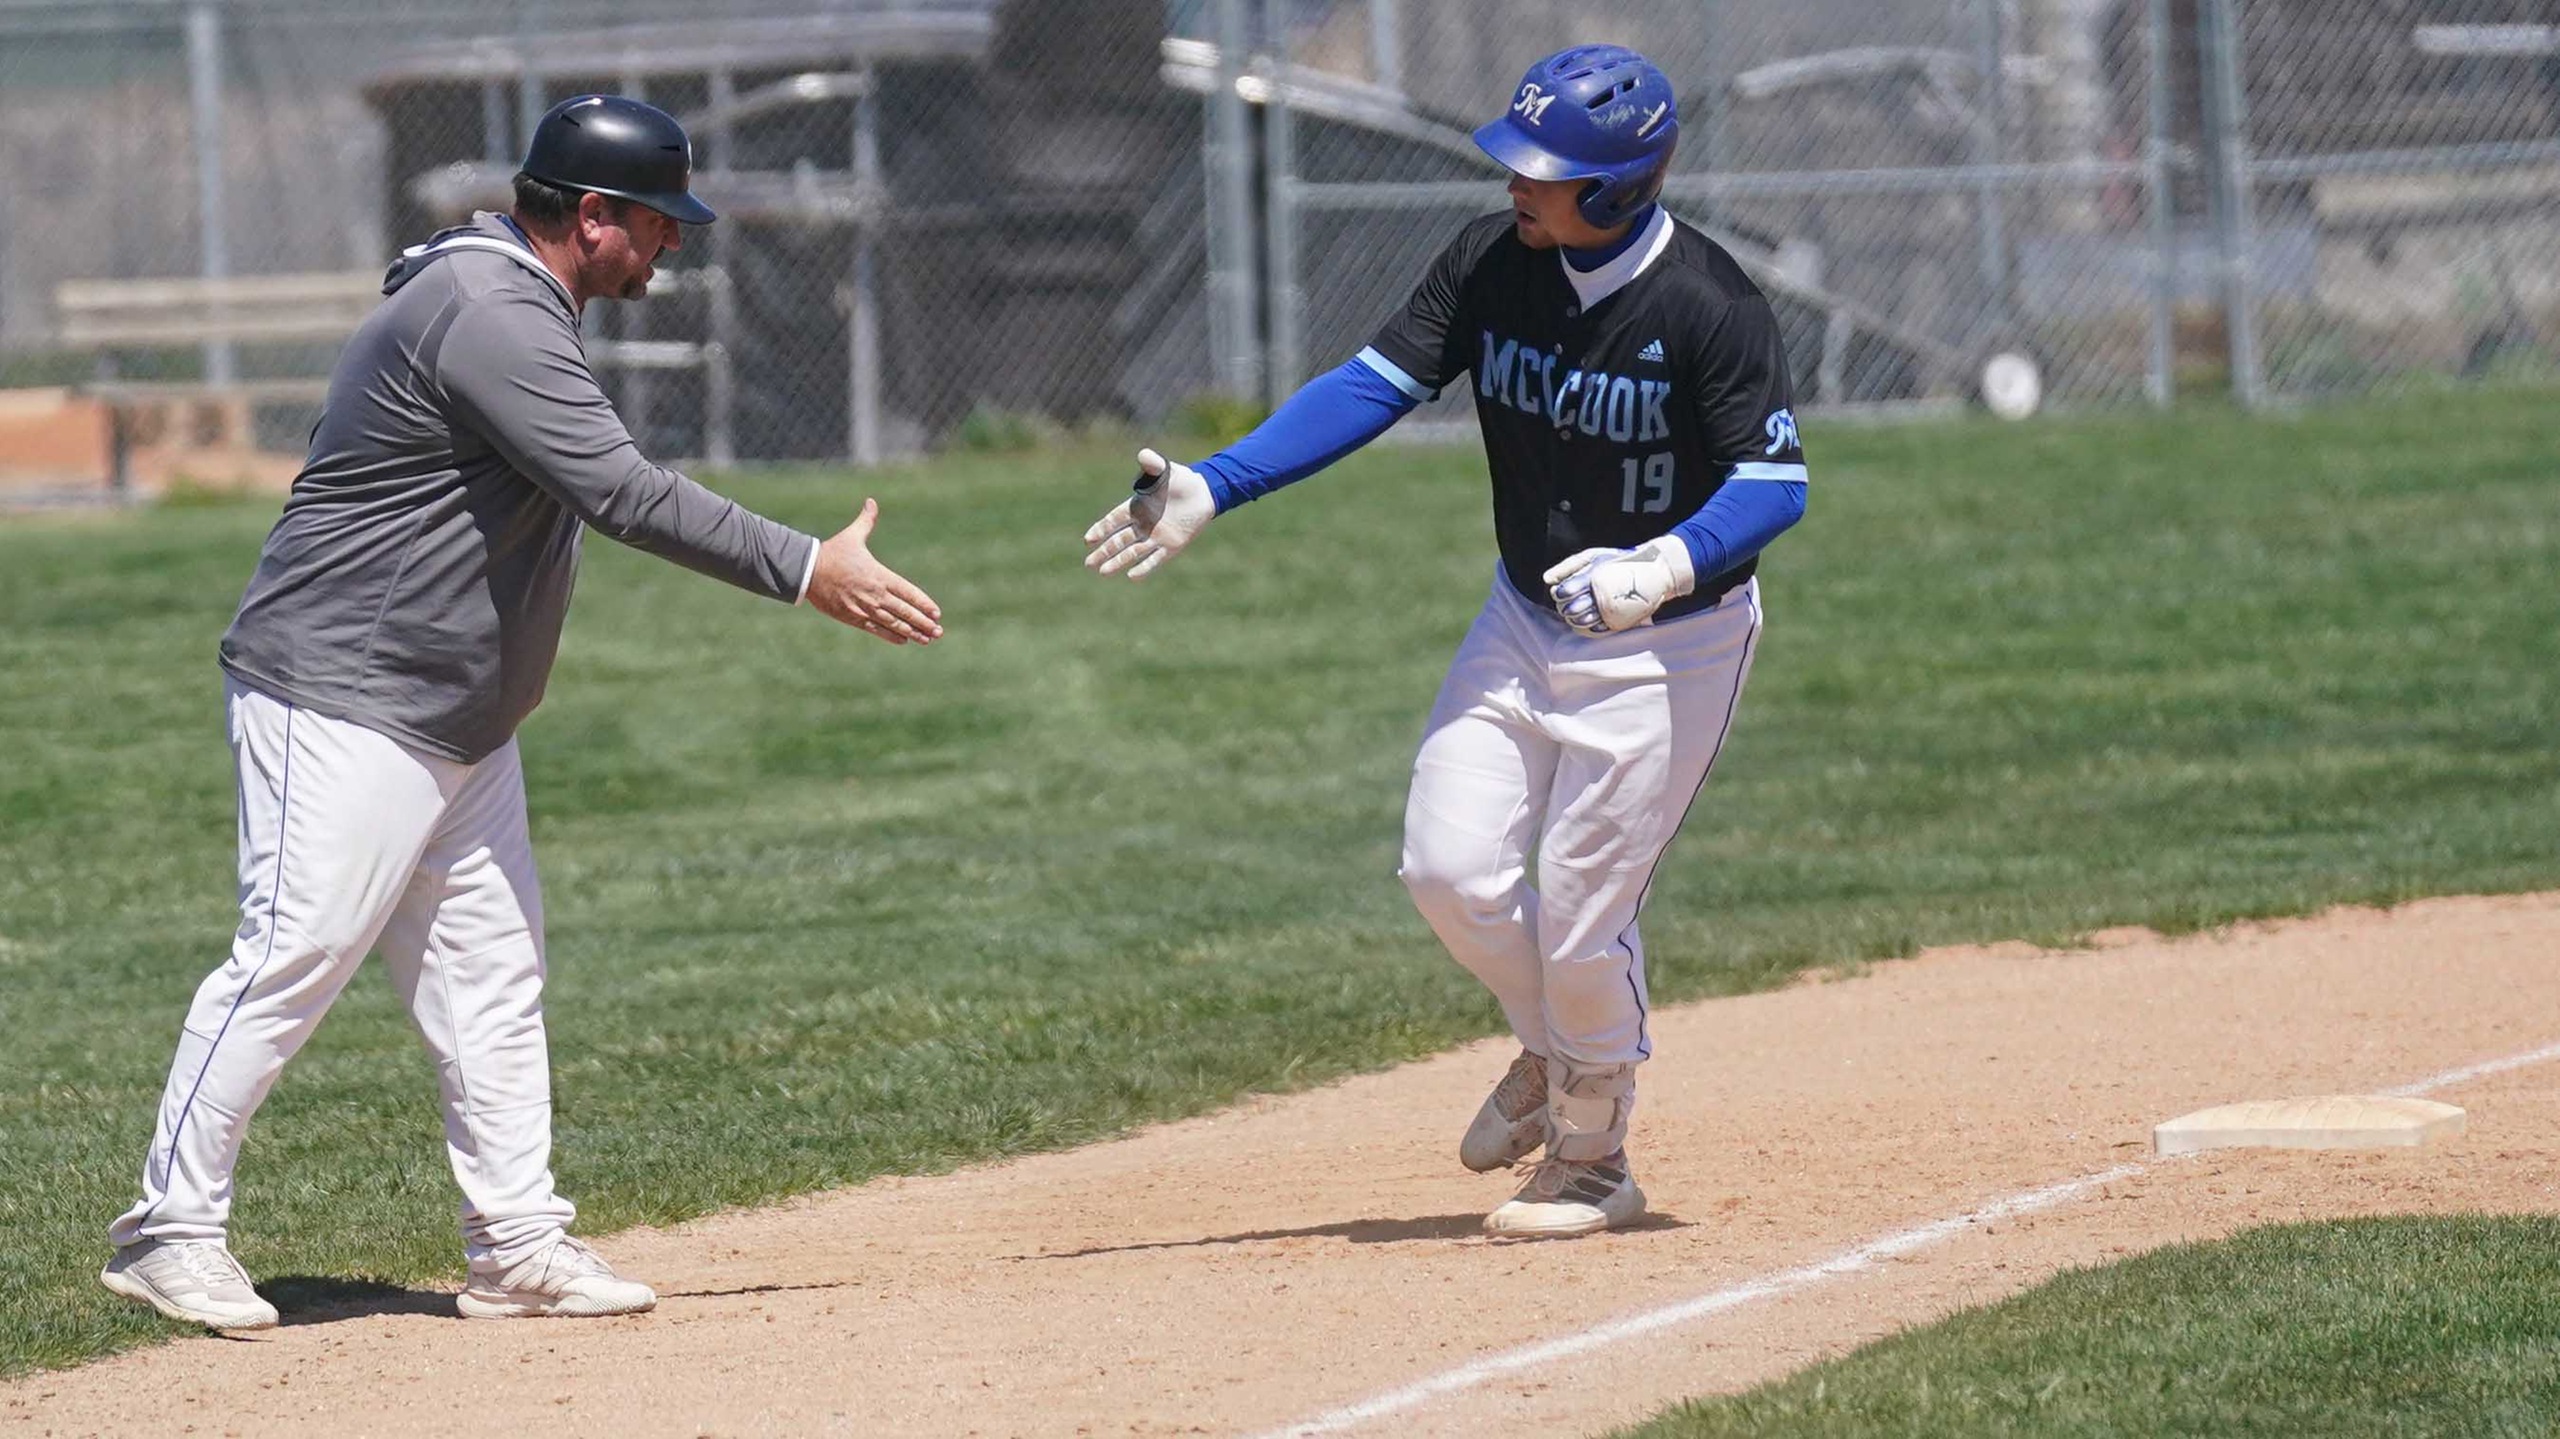 Big second inning lifts Colby past MCC baseball